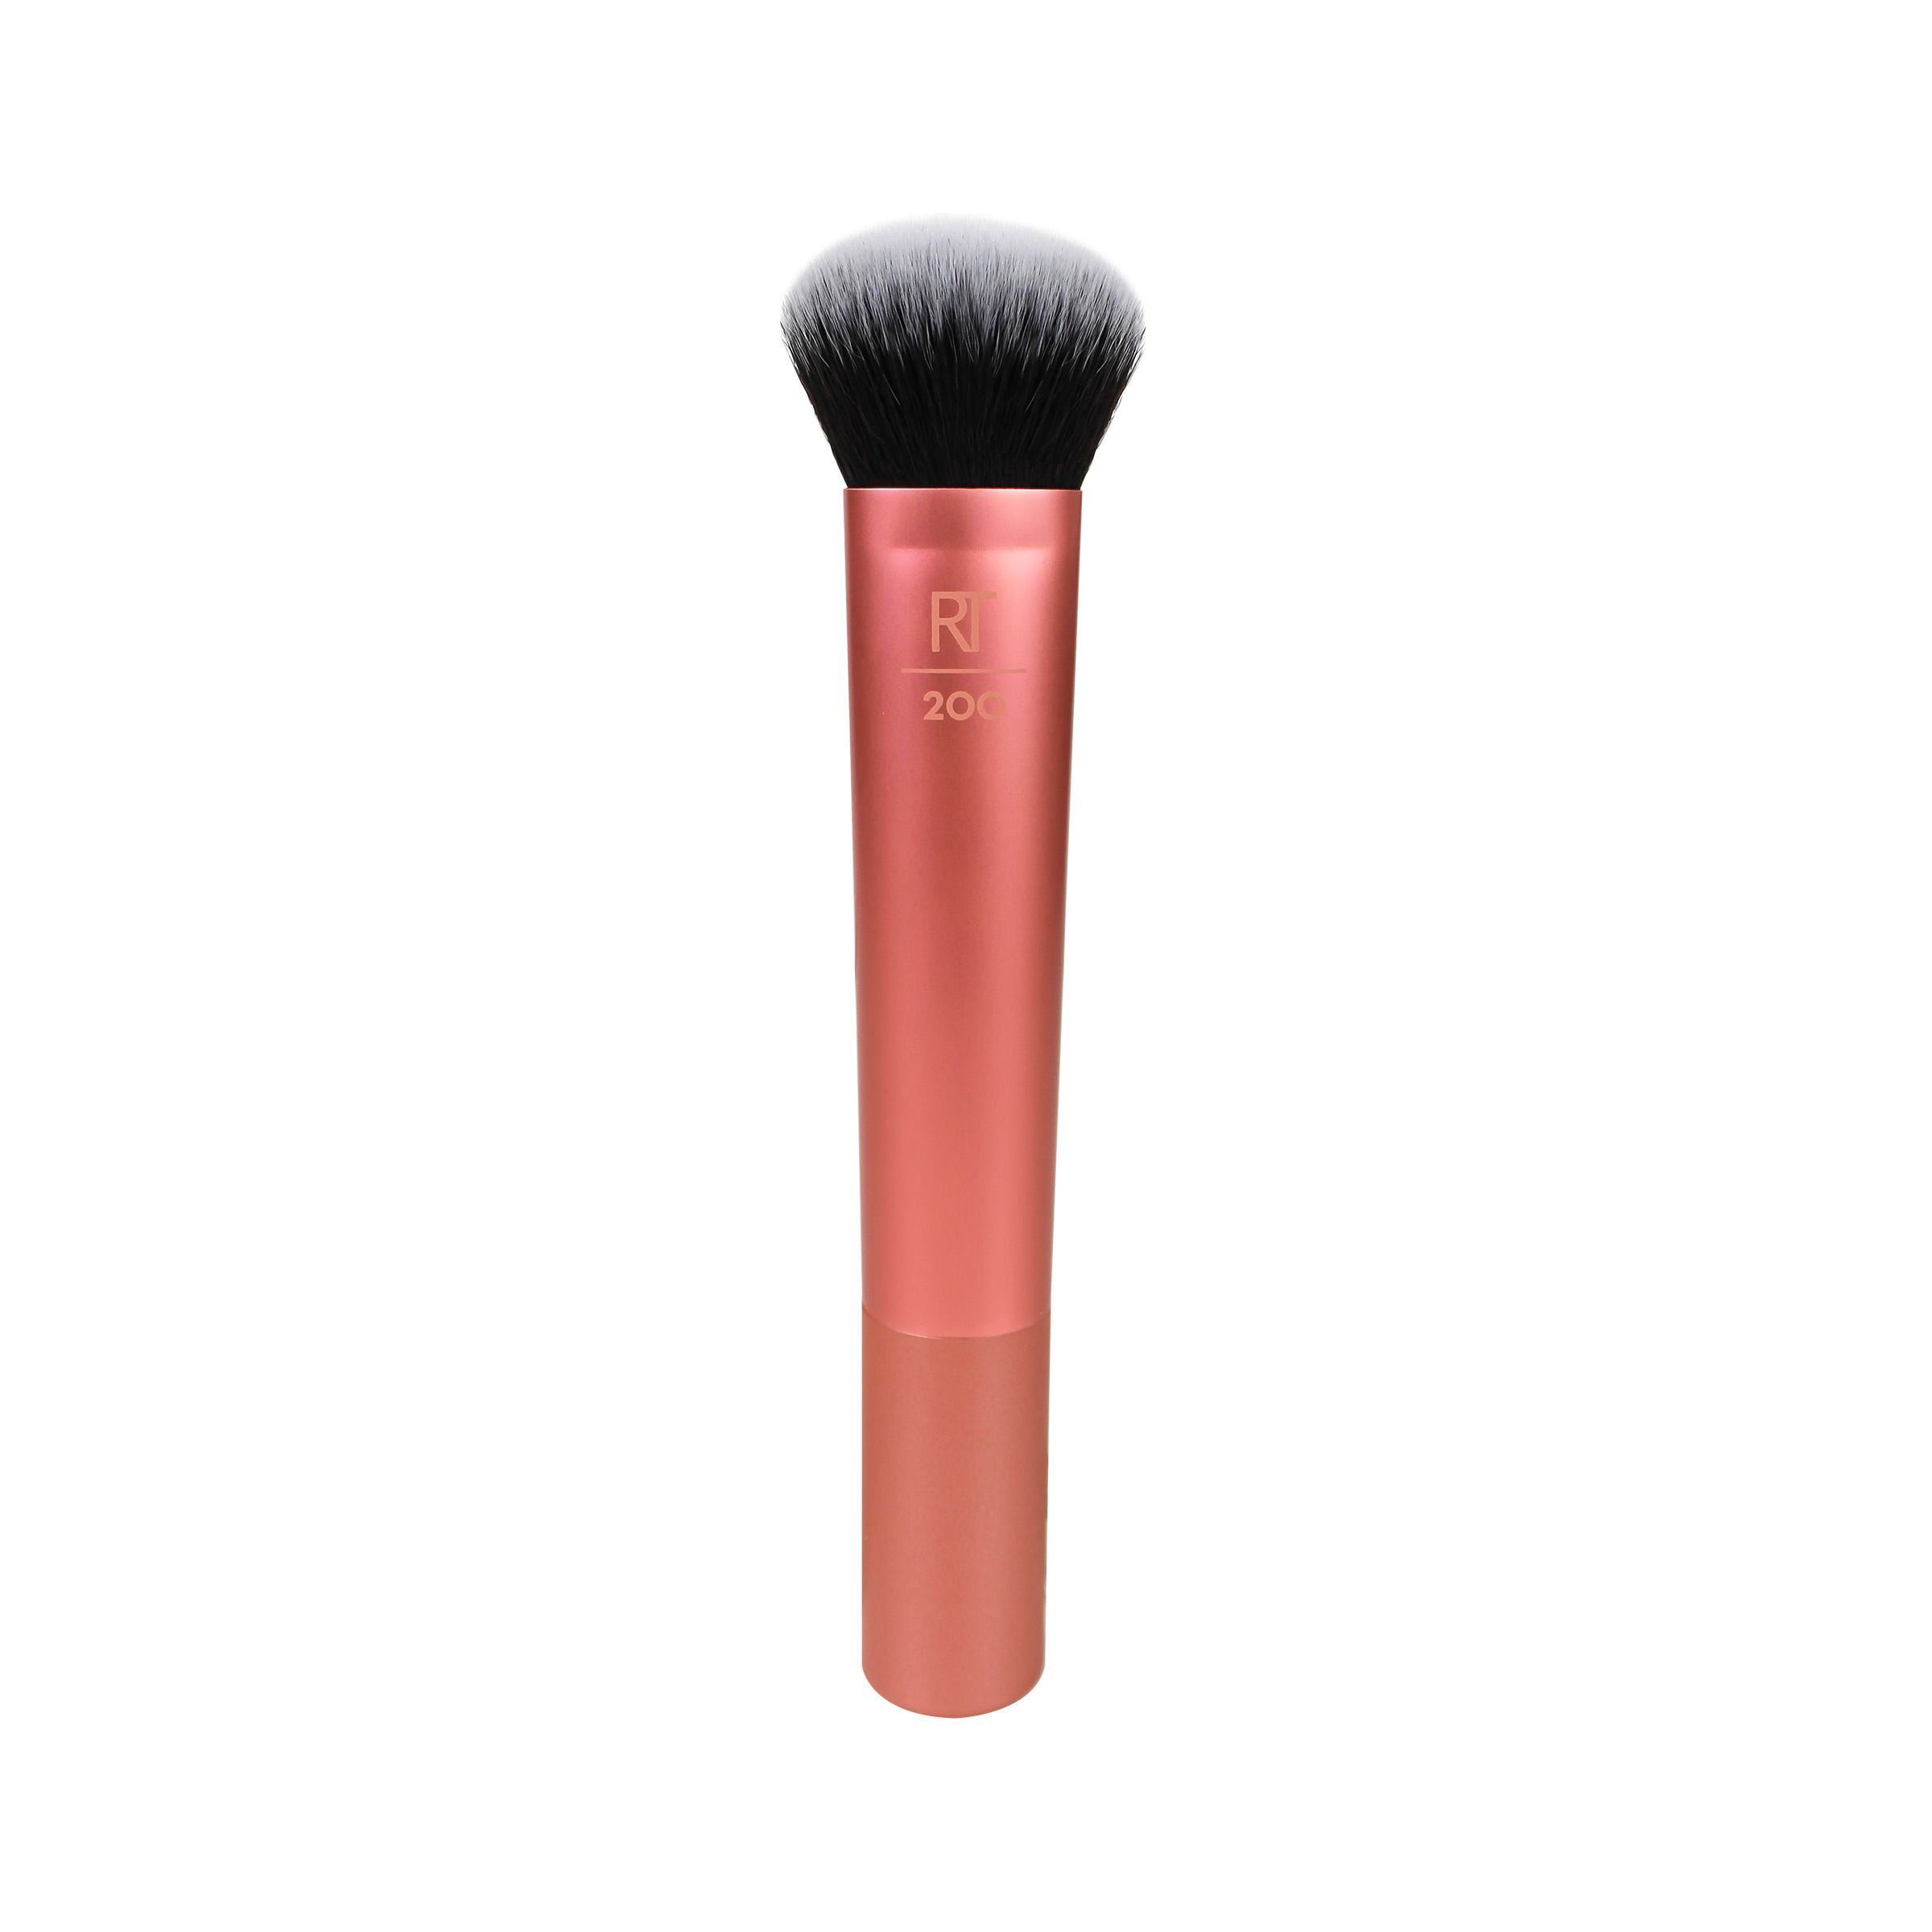 Real Techniques Expert Face Makeup Brush, Foundation Blending Brush, 1 Count - image 1 of 11